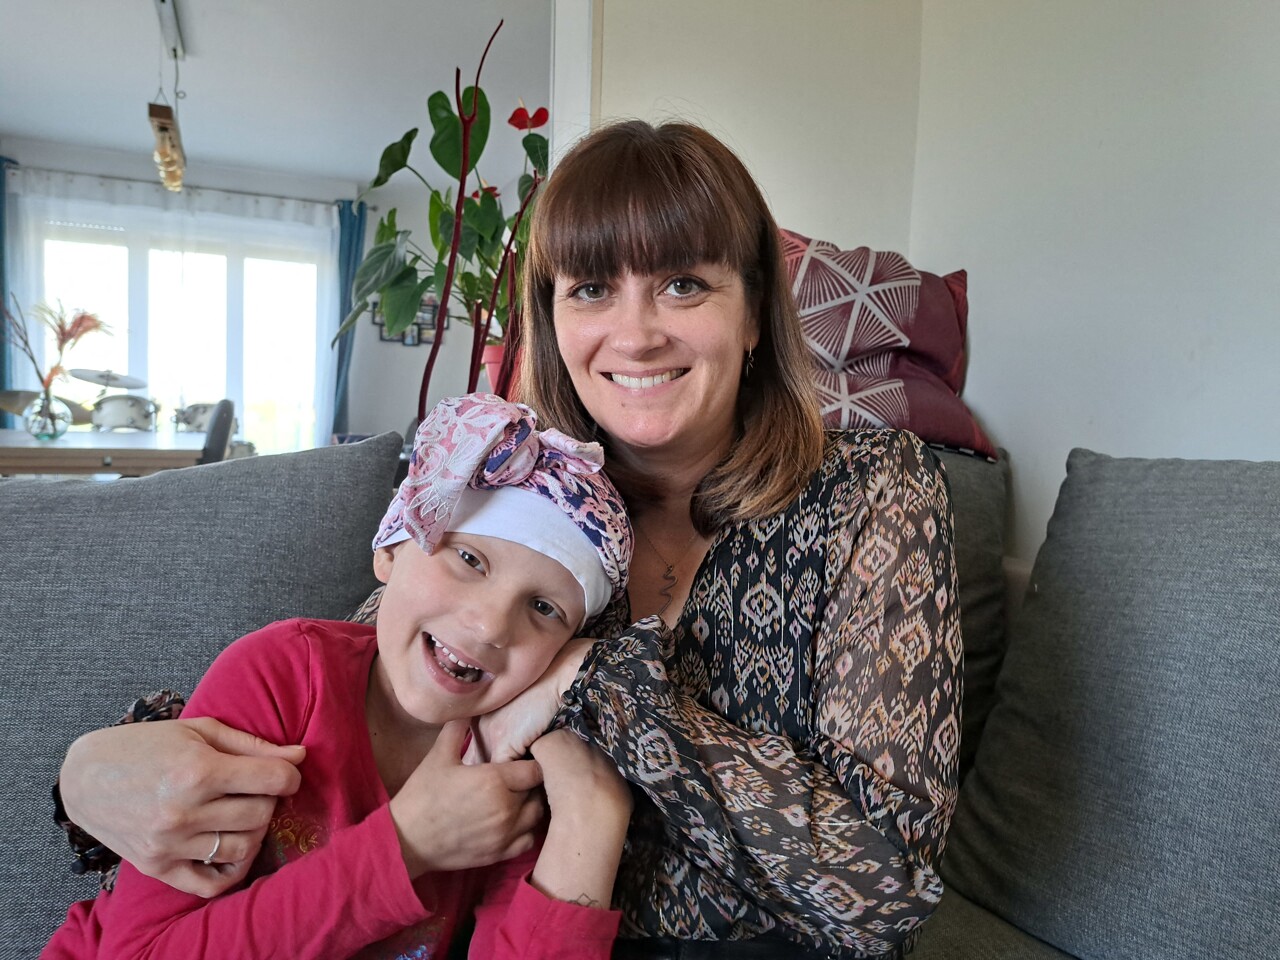 In Morbihan, Maëlys, 6 years old, embarks on a long fight against cancer